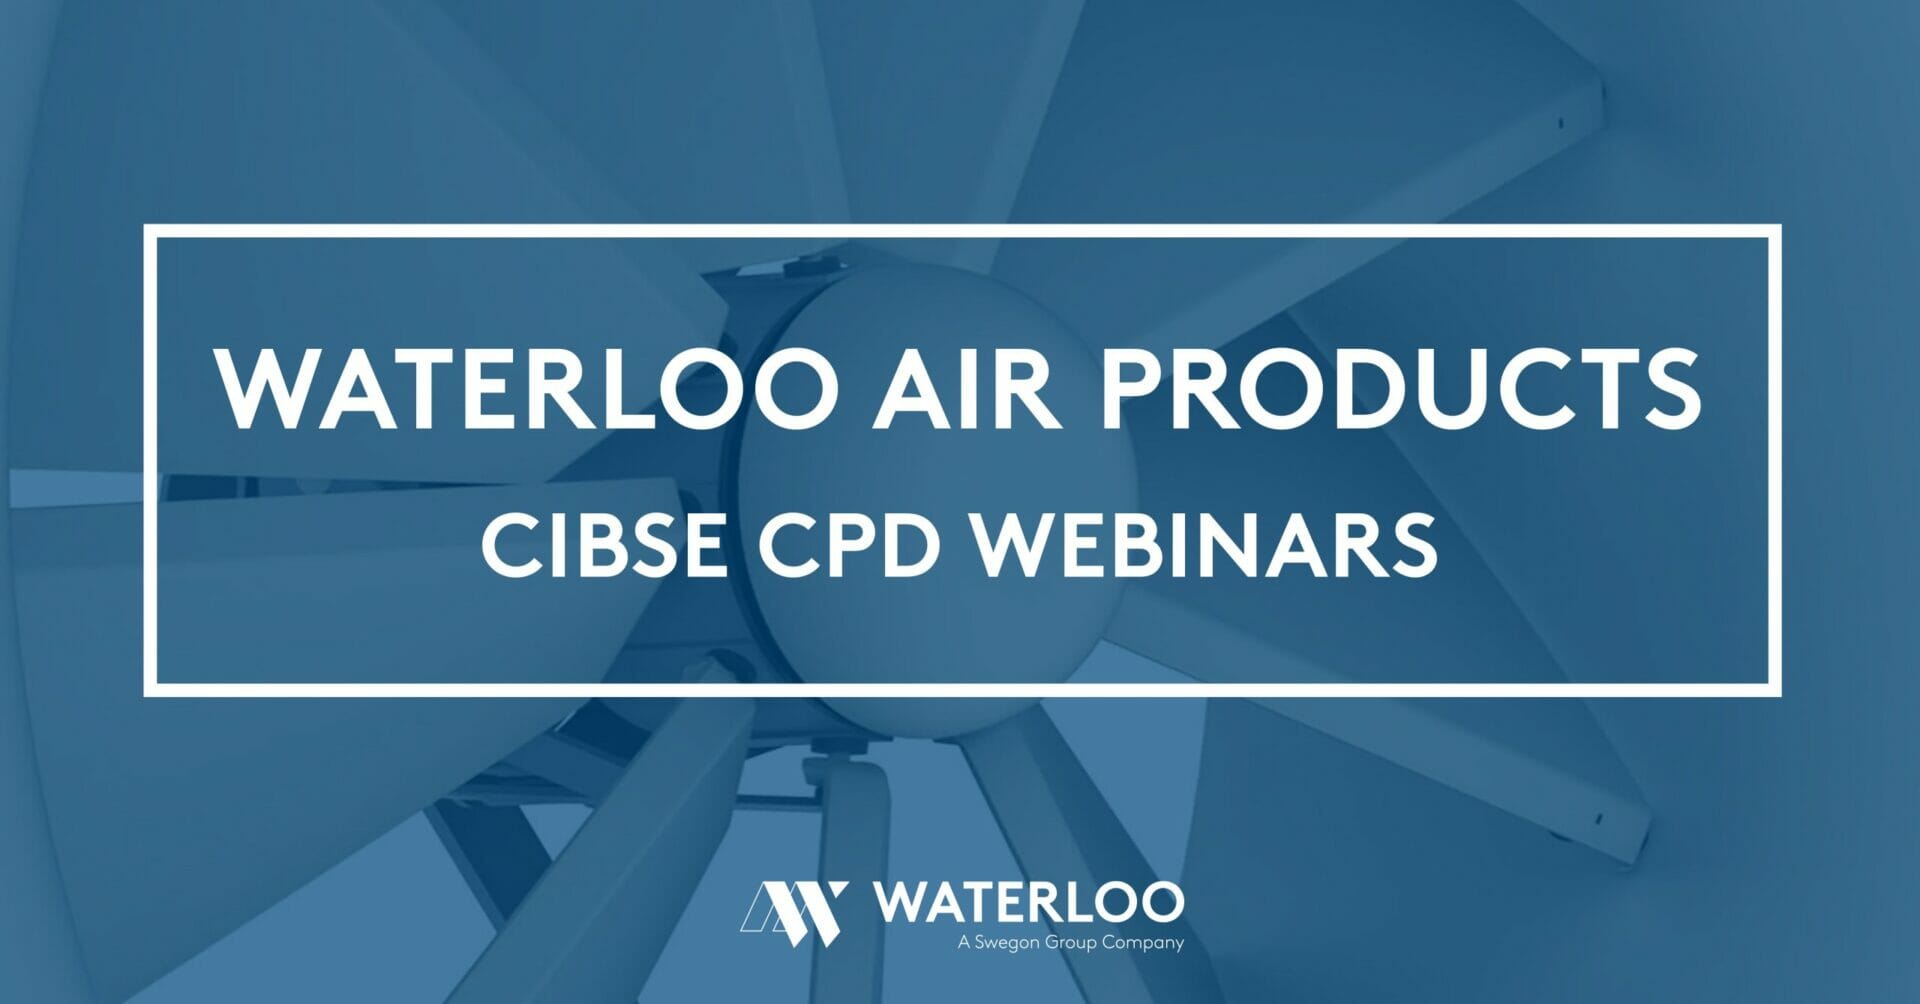 Waterloo’s CIBSE approved CPD’s are now available to all as live Webinars @WaterlooHVAC